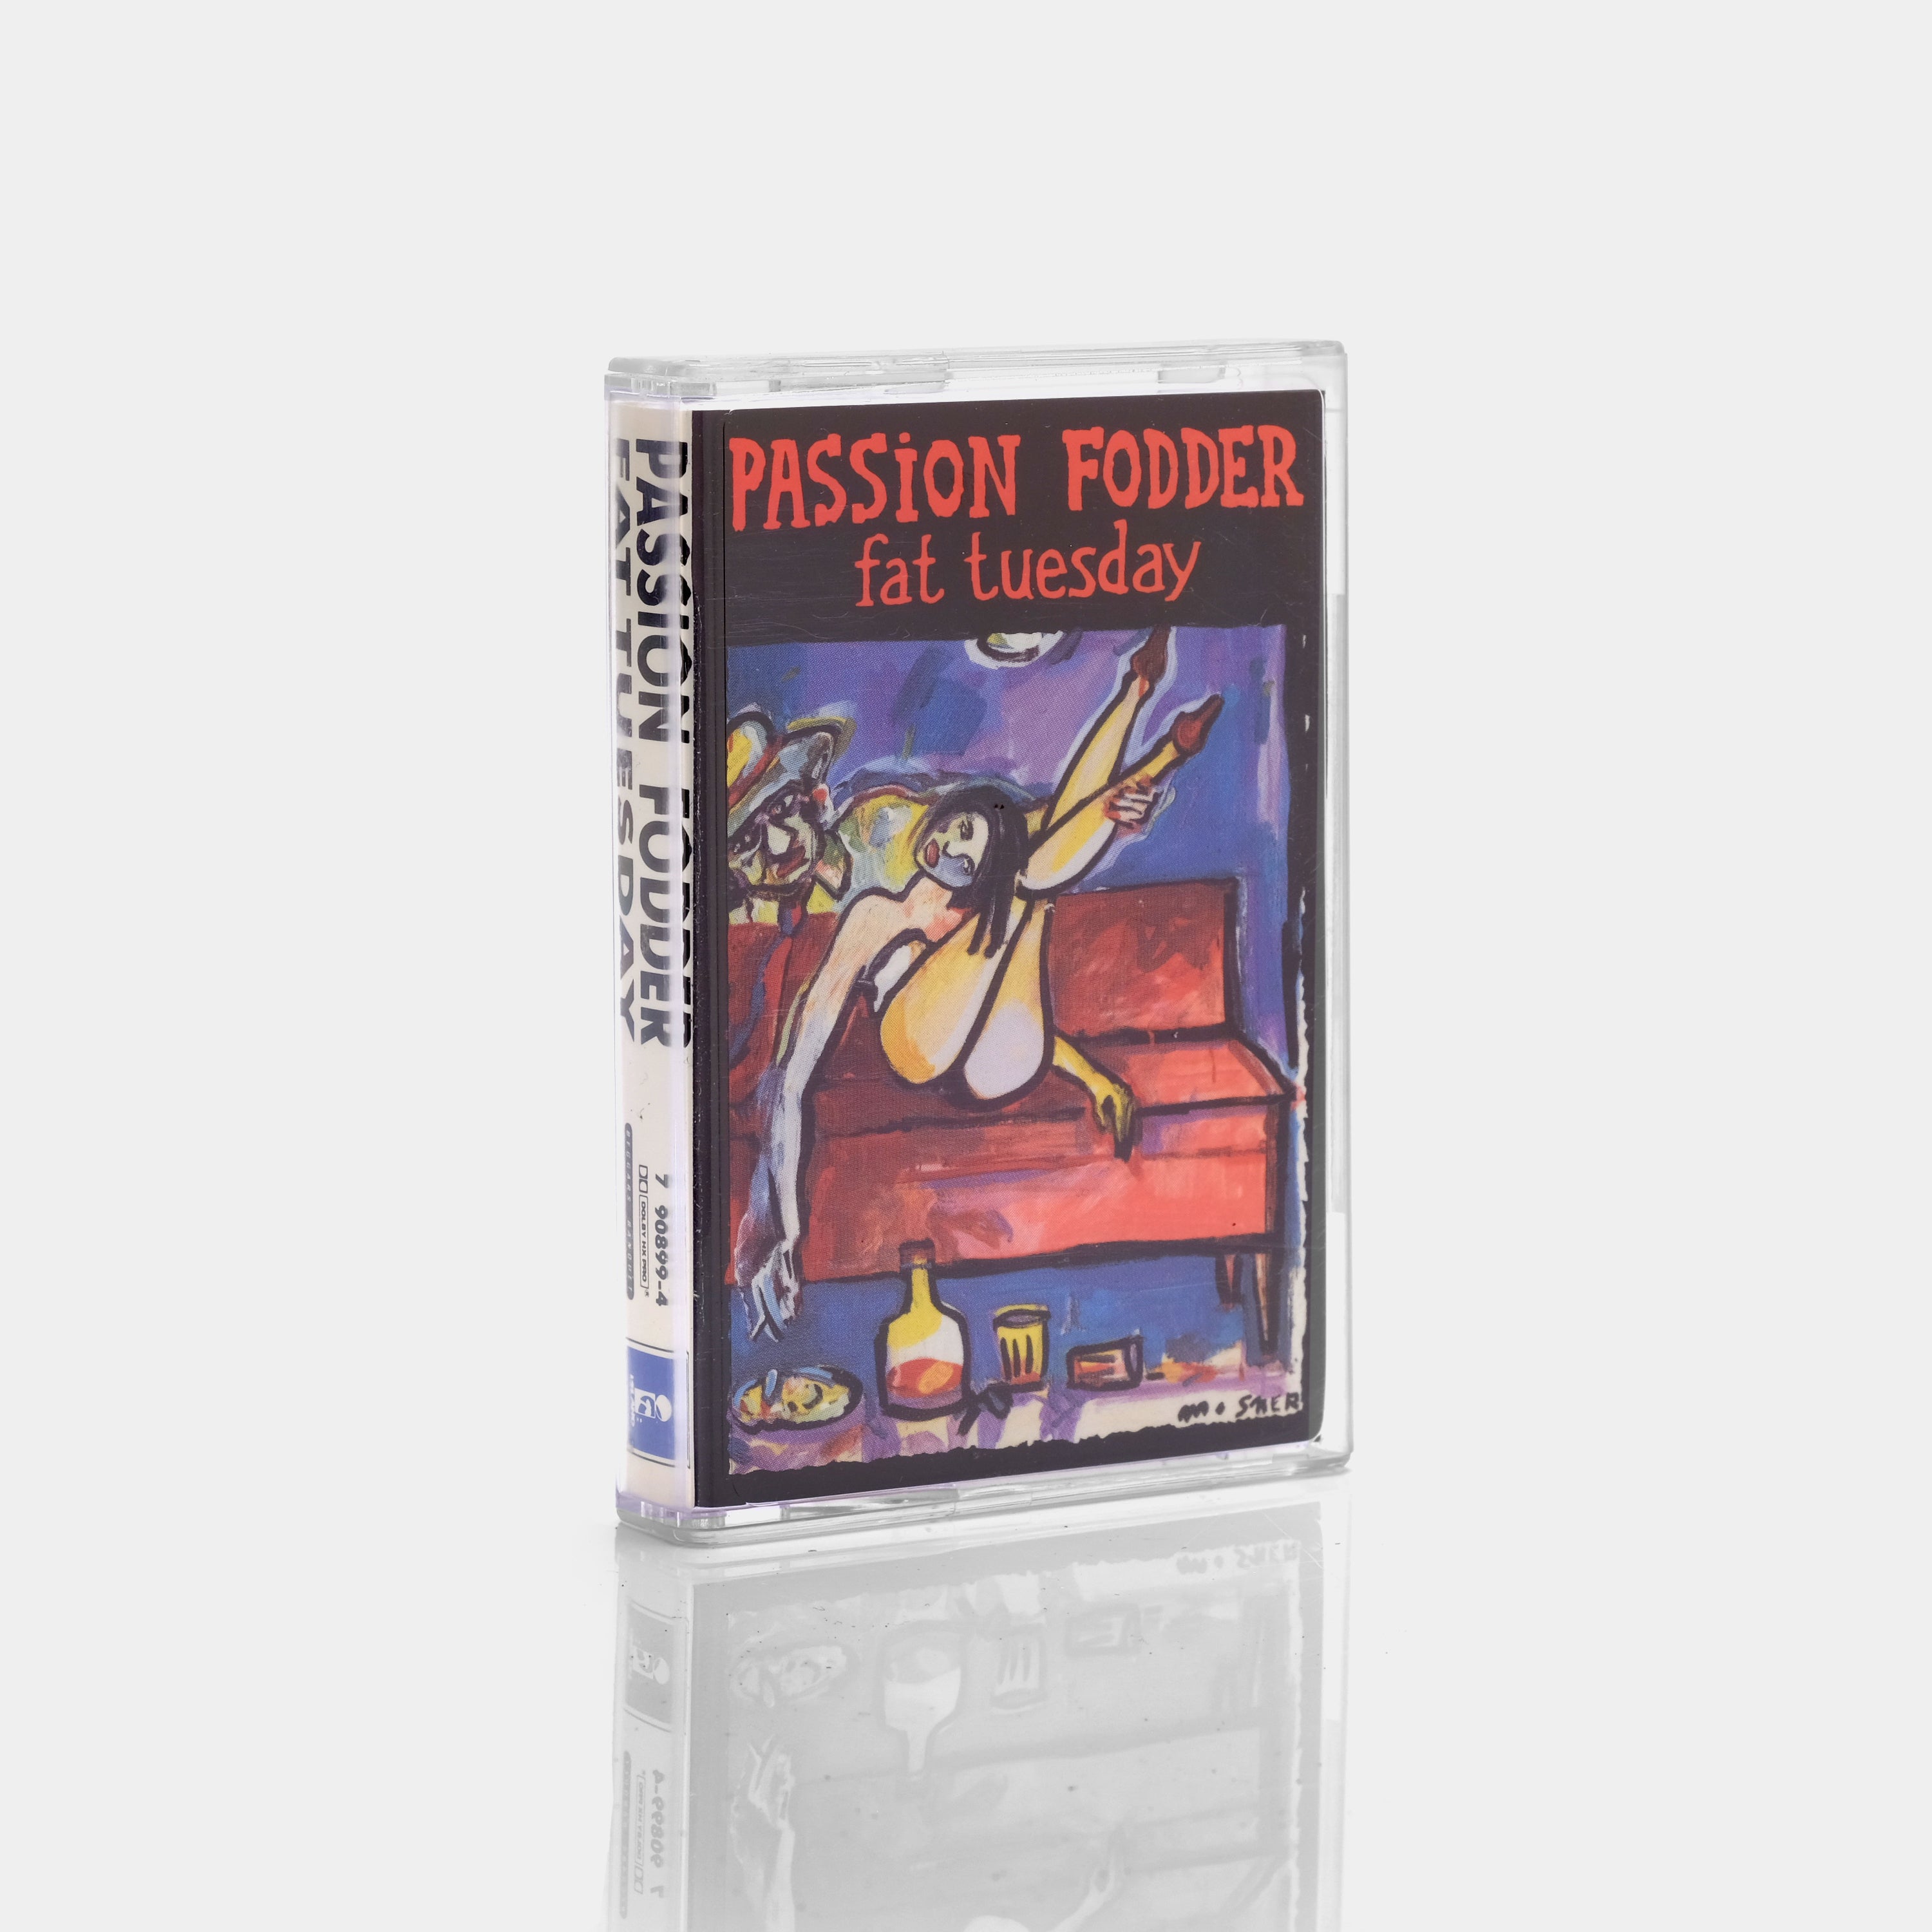 Passion Fodder - Fat Tuesday Cassette Tape